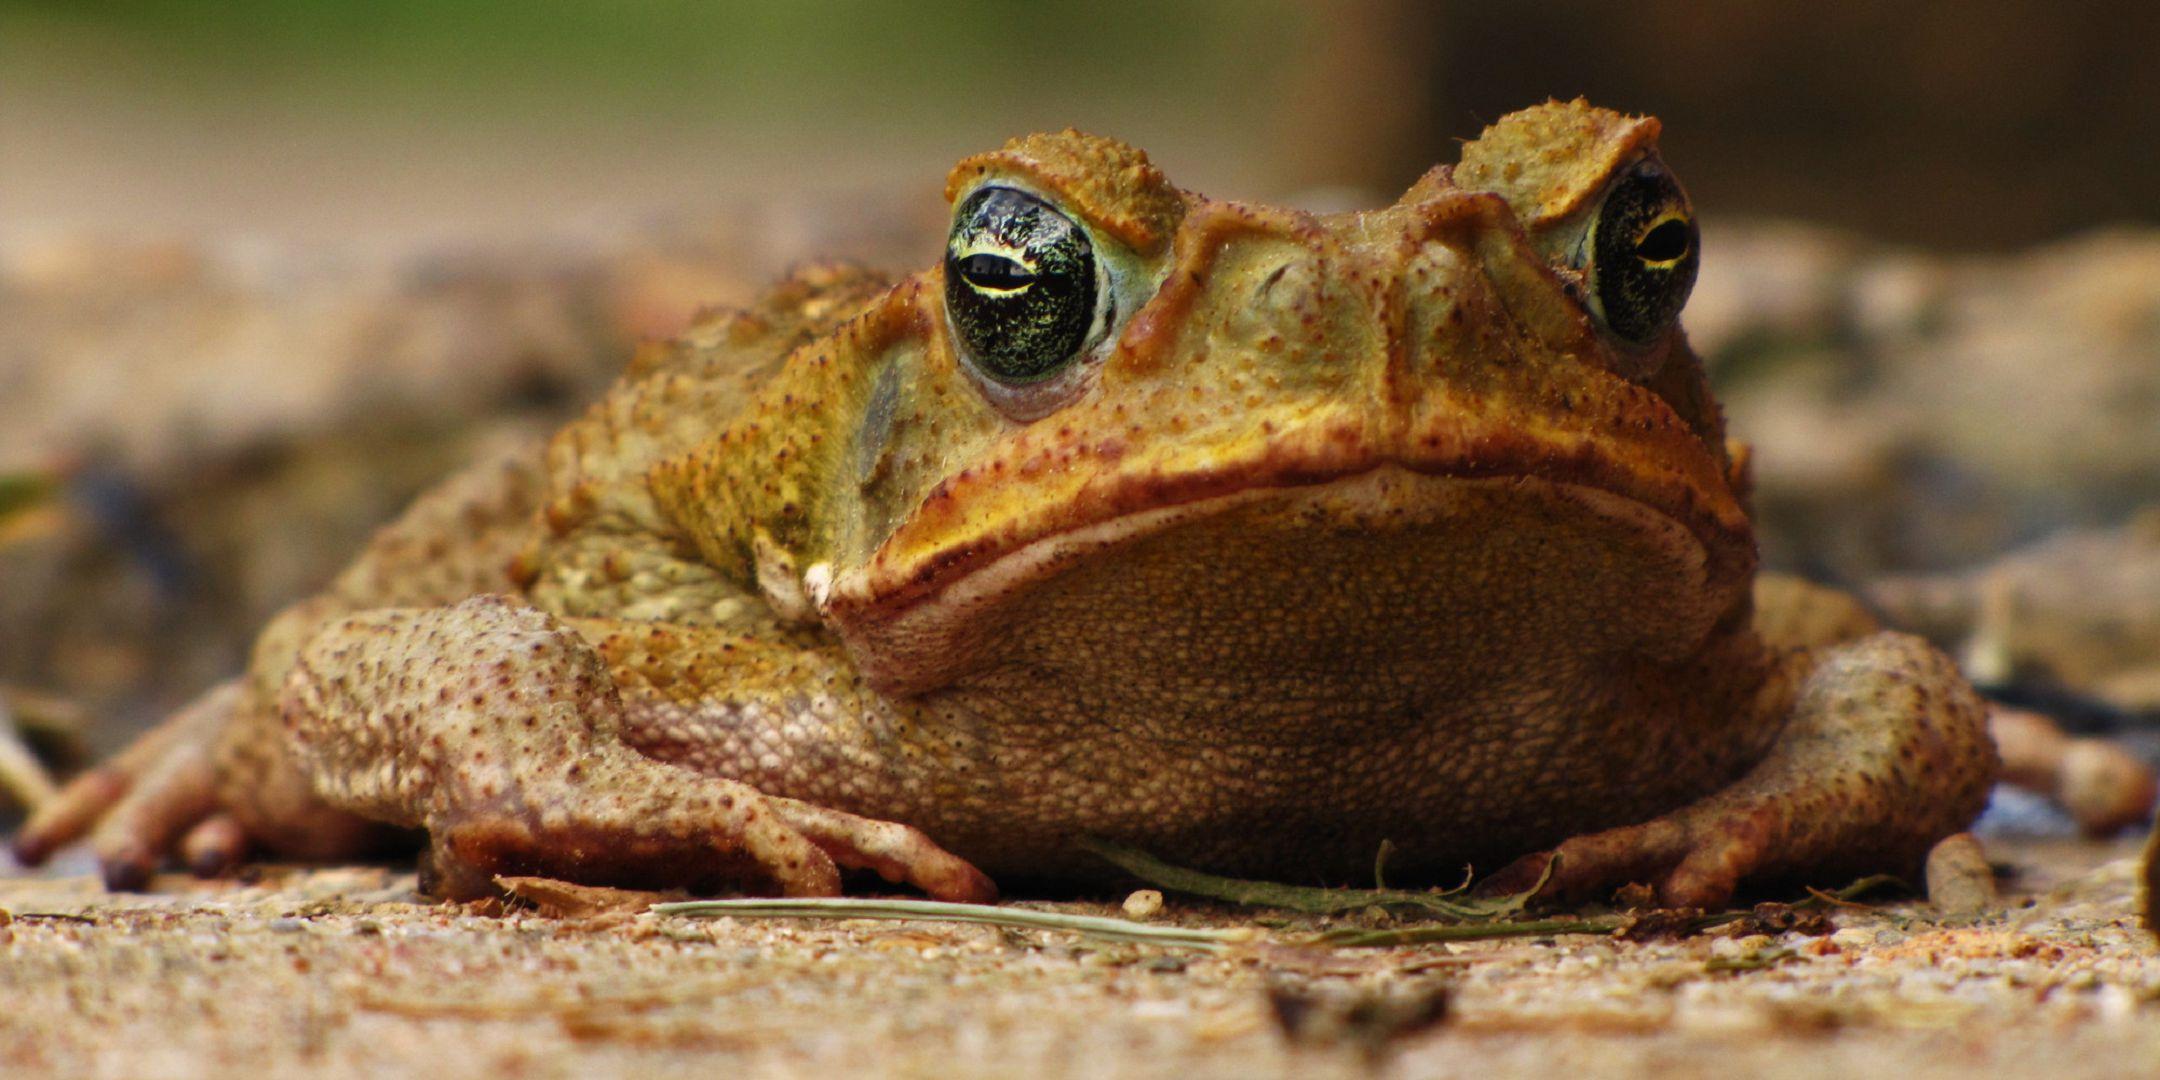 Toads Hd Wallpaper 4k For Pc